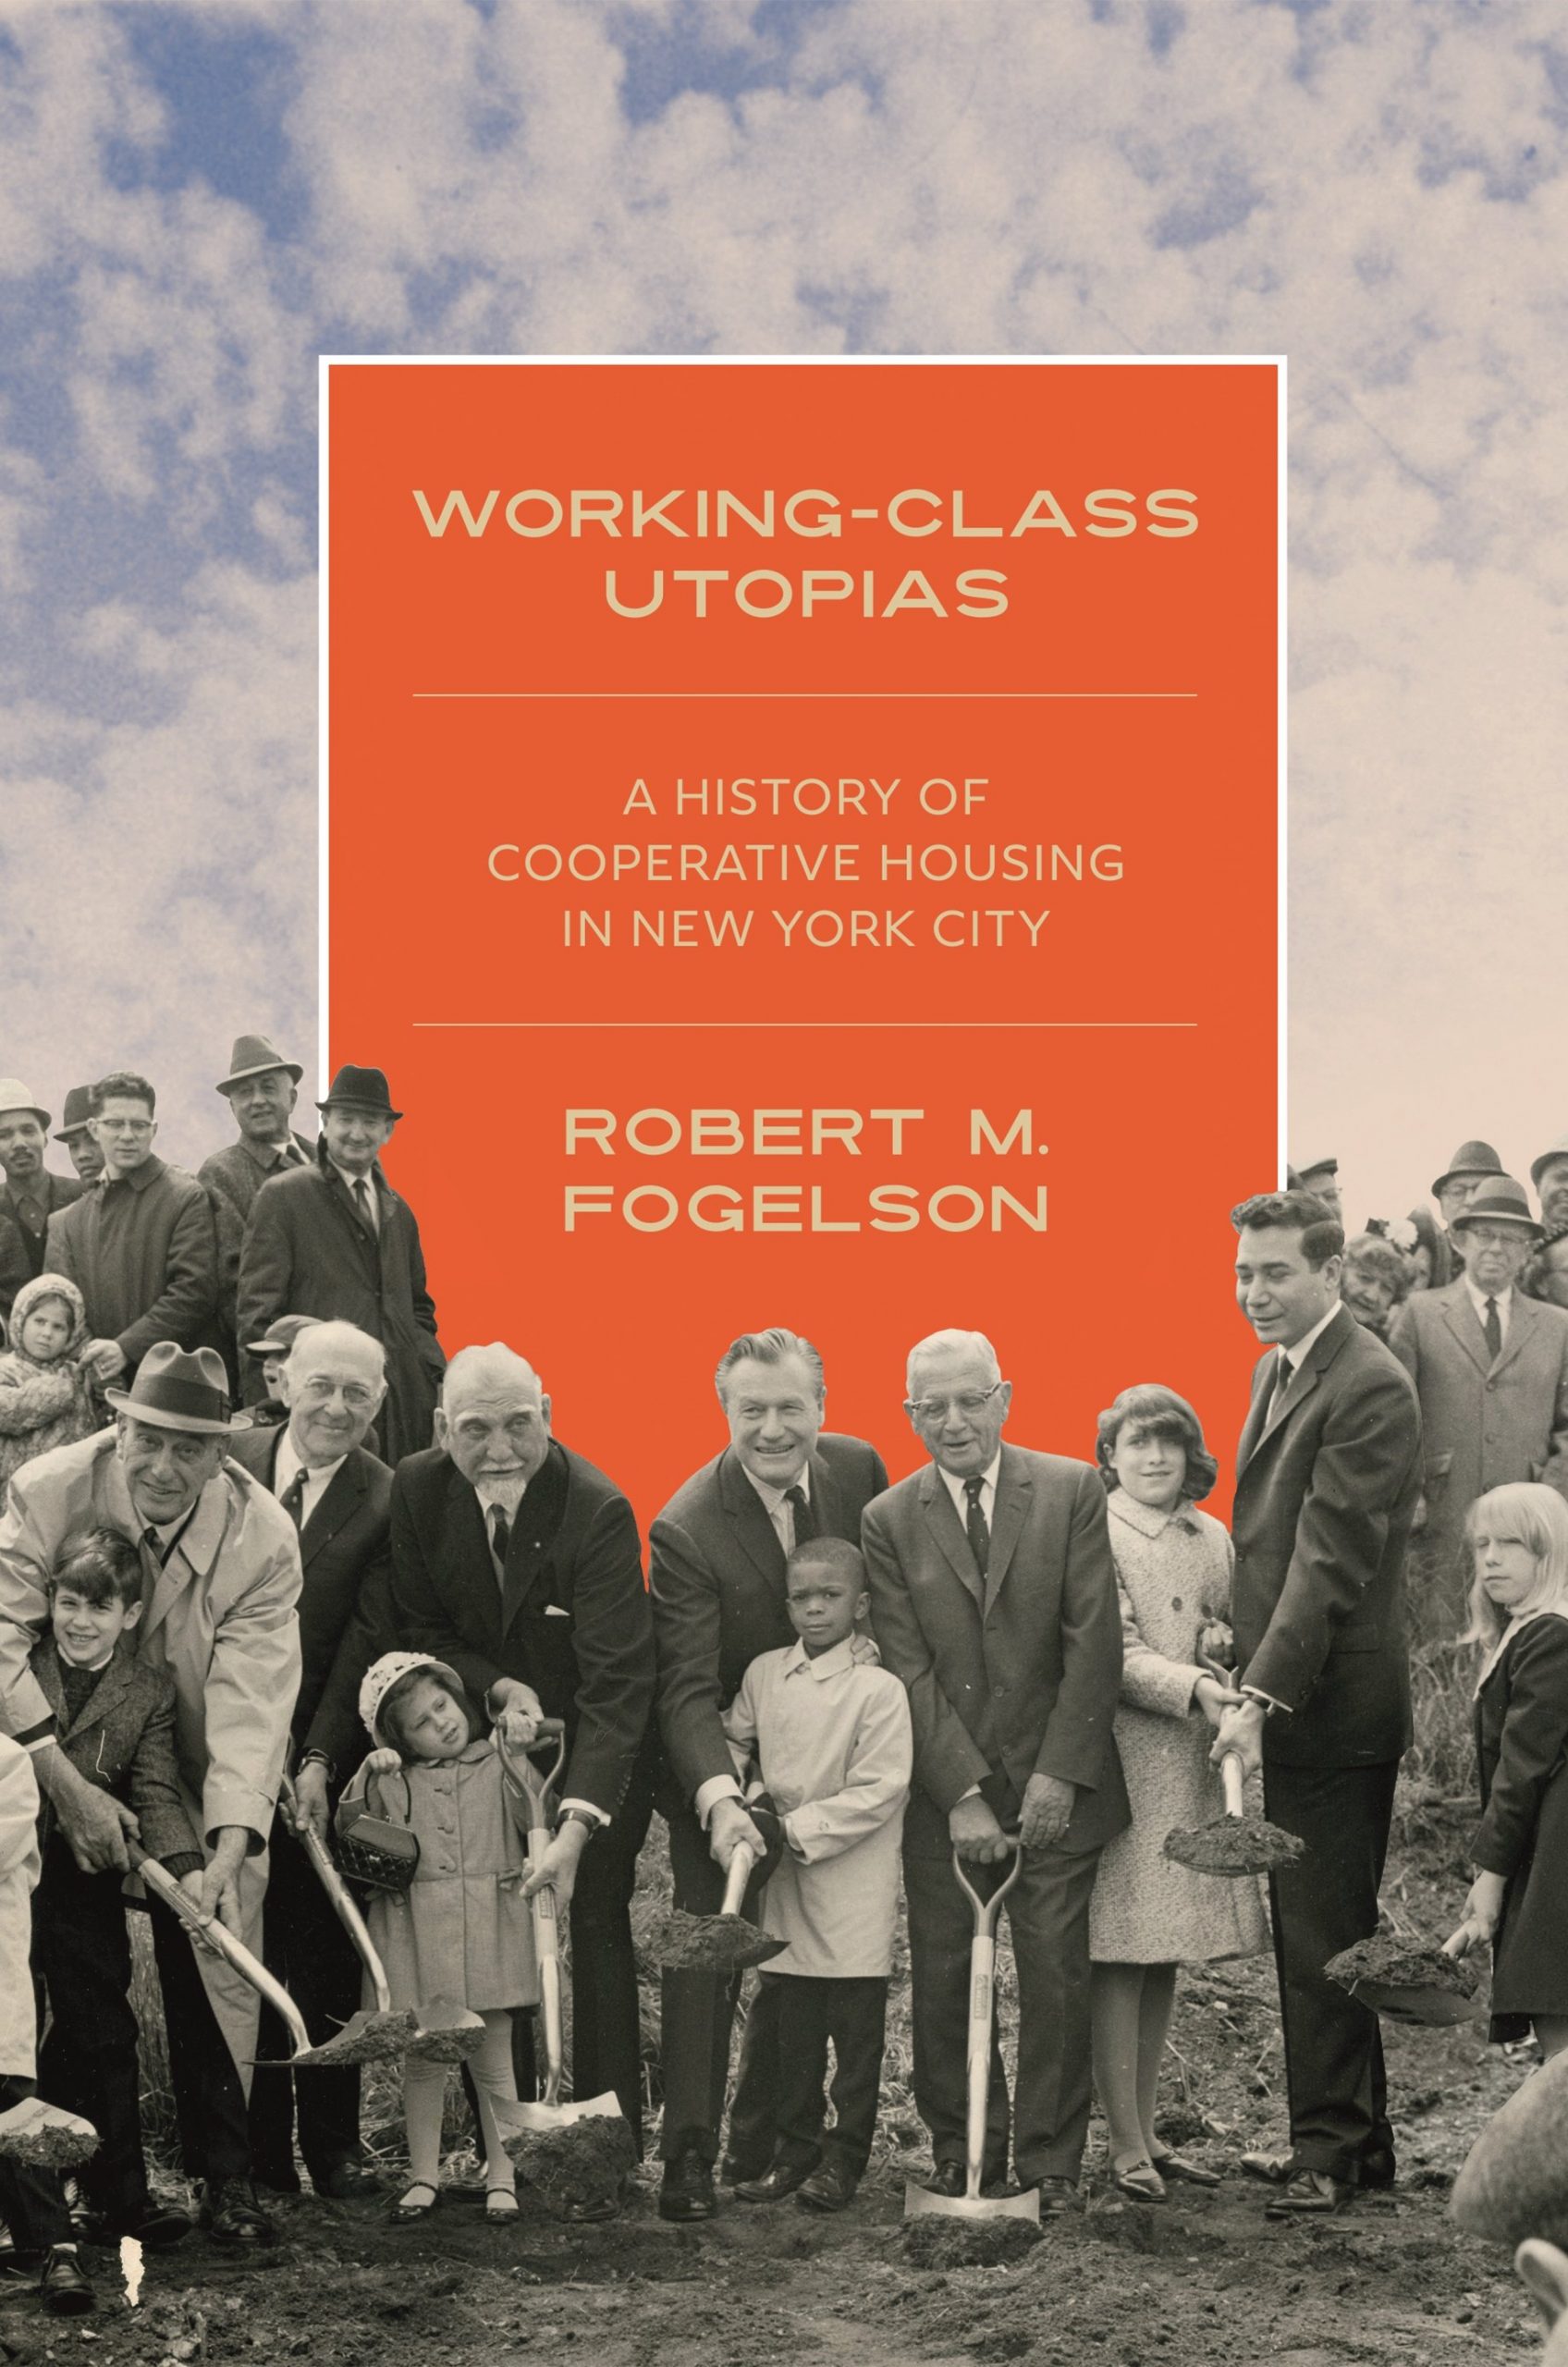 WorkingClass Utopias A History of Cooperative Housing in New York